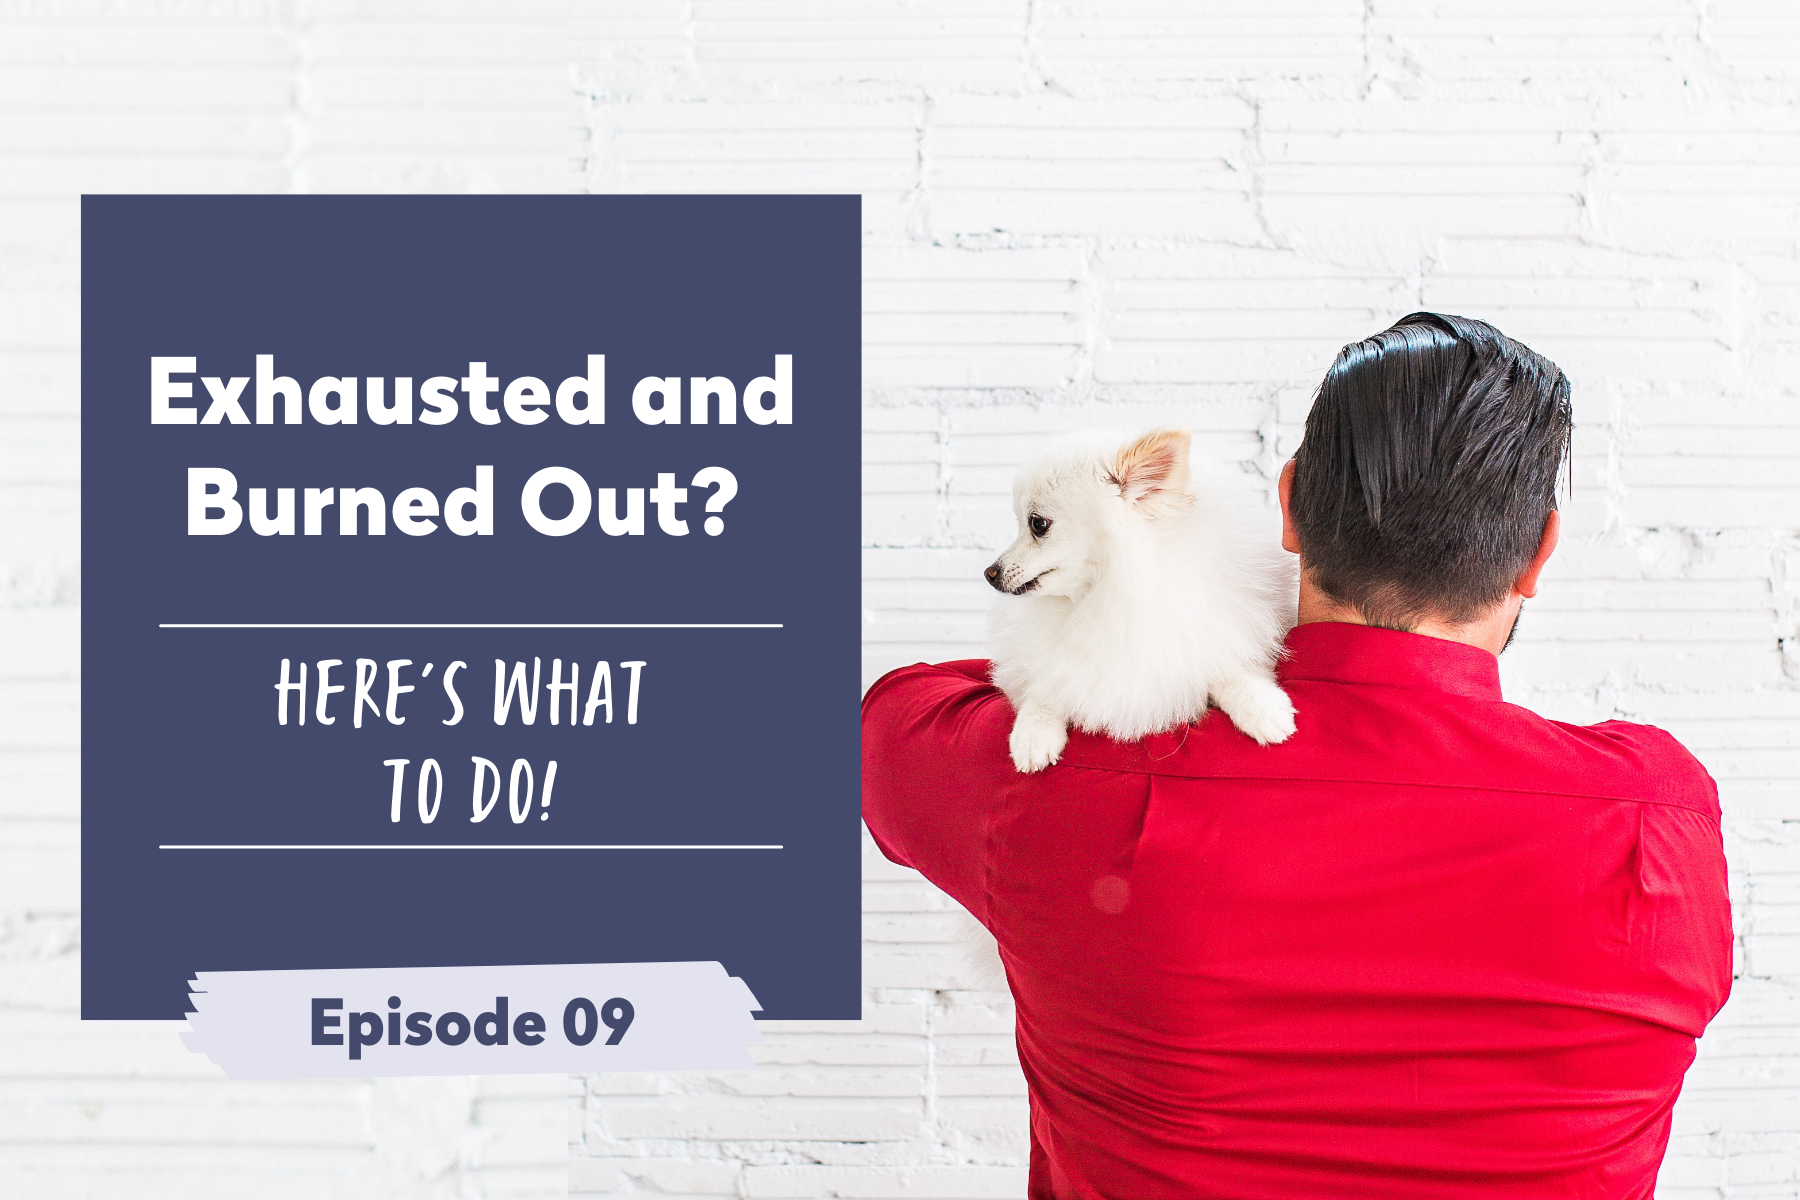 Episode 9 | Exhausted and Burned Out? Here’s what to do!